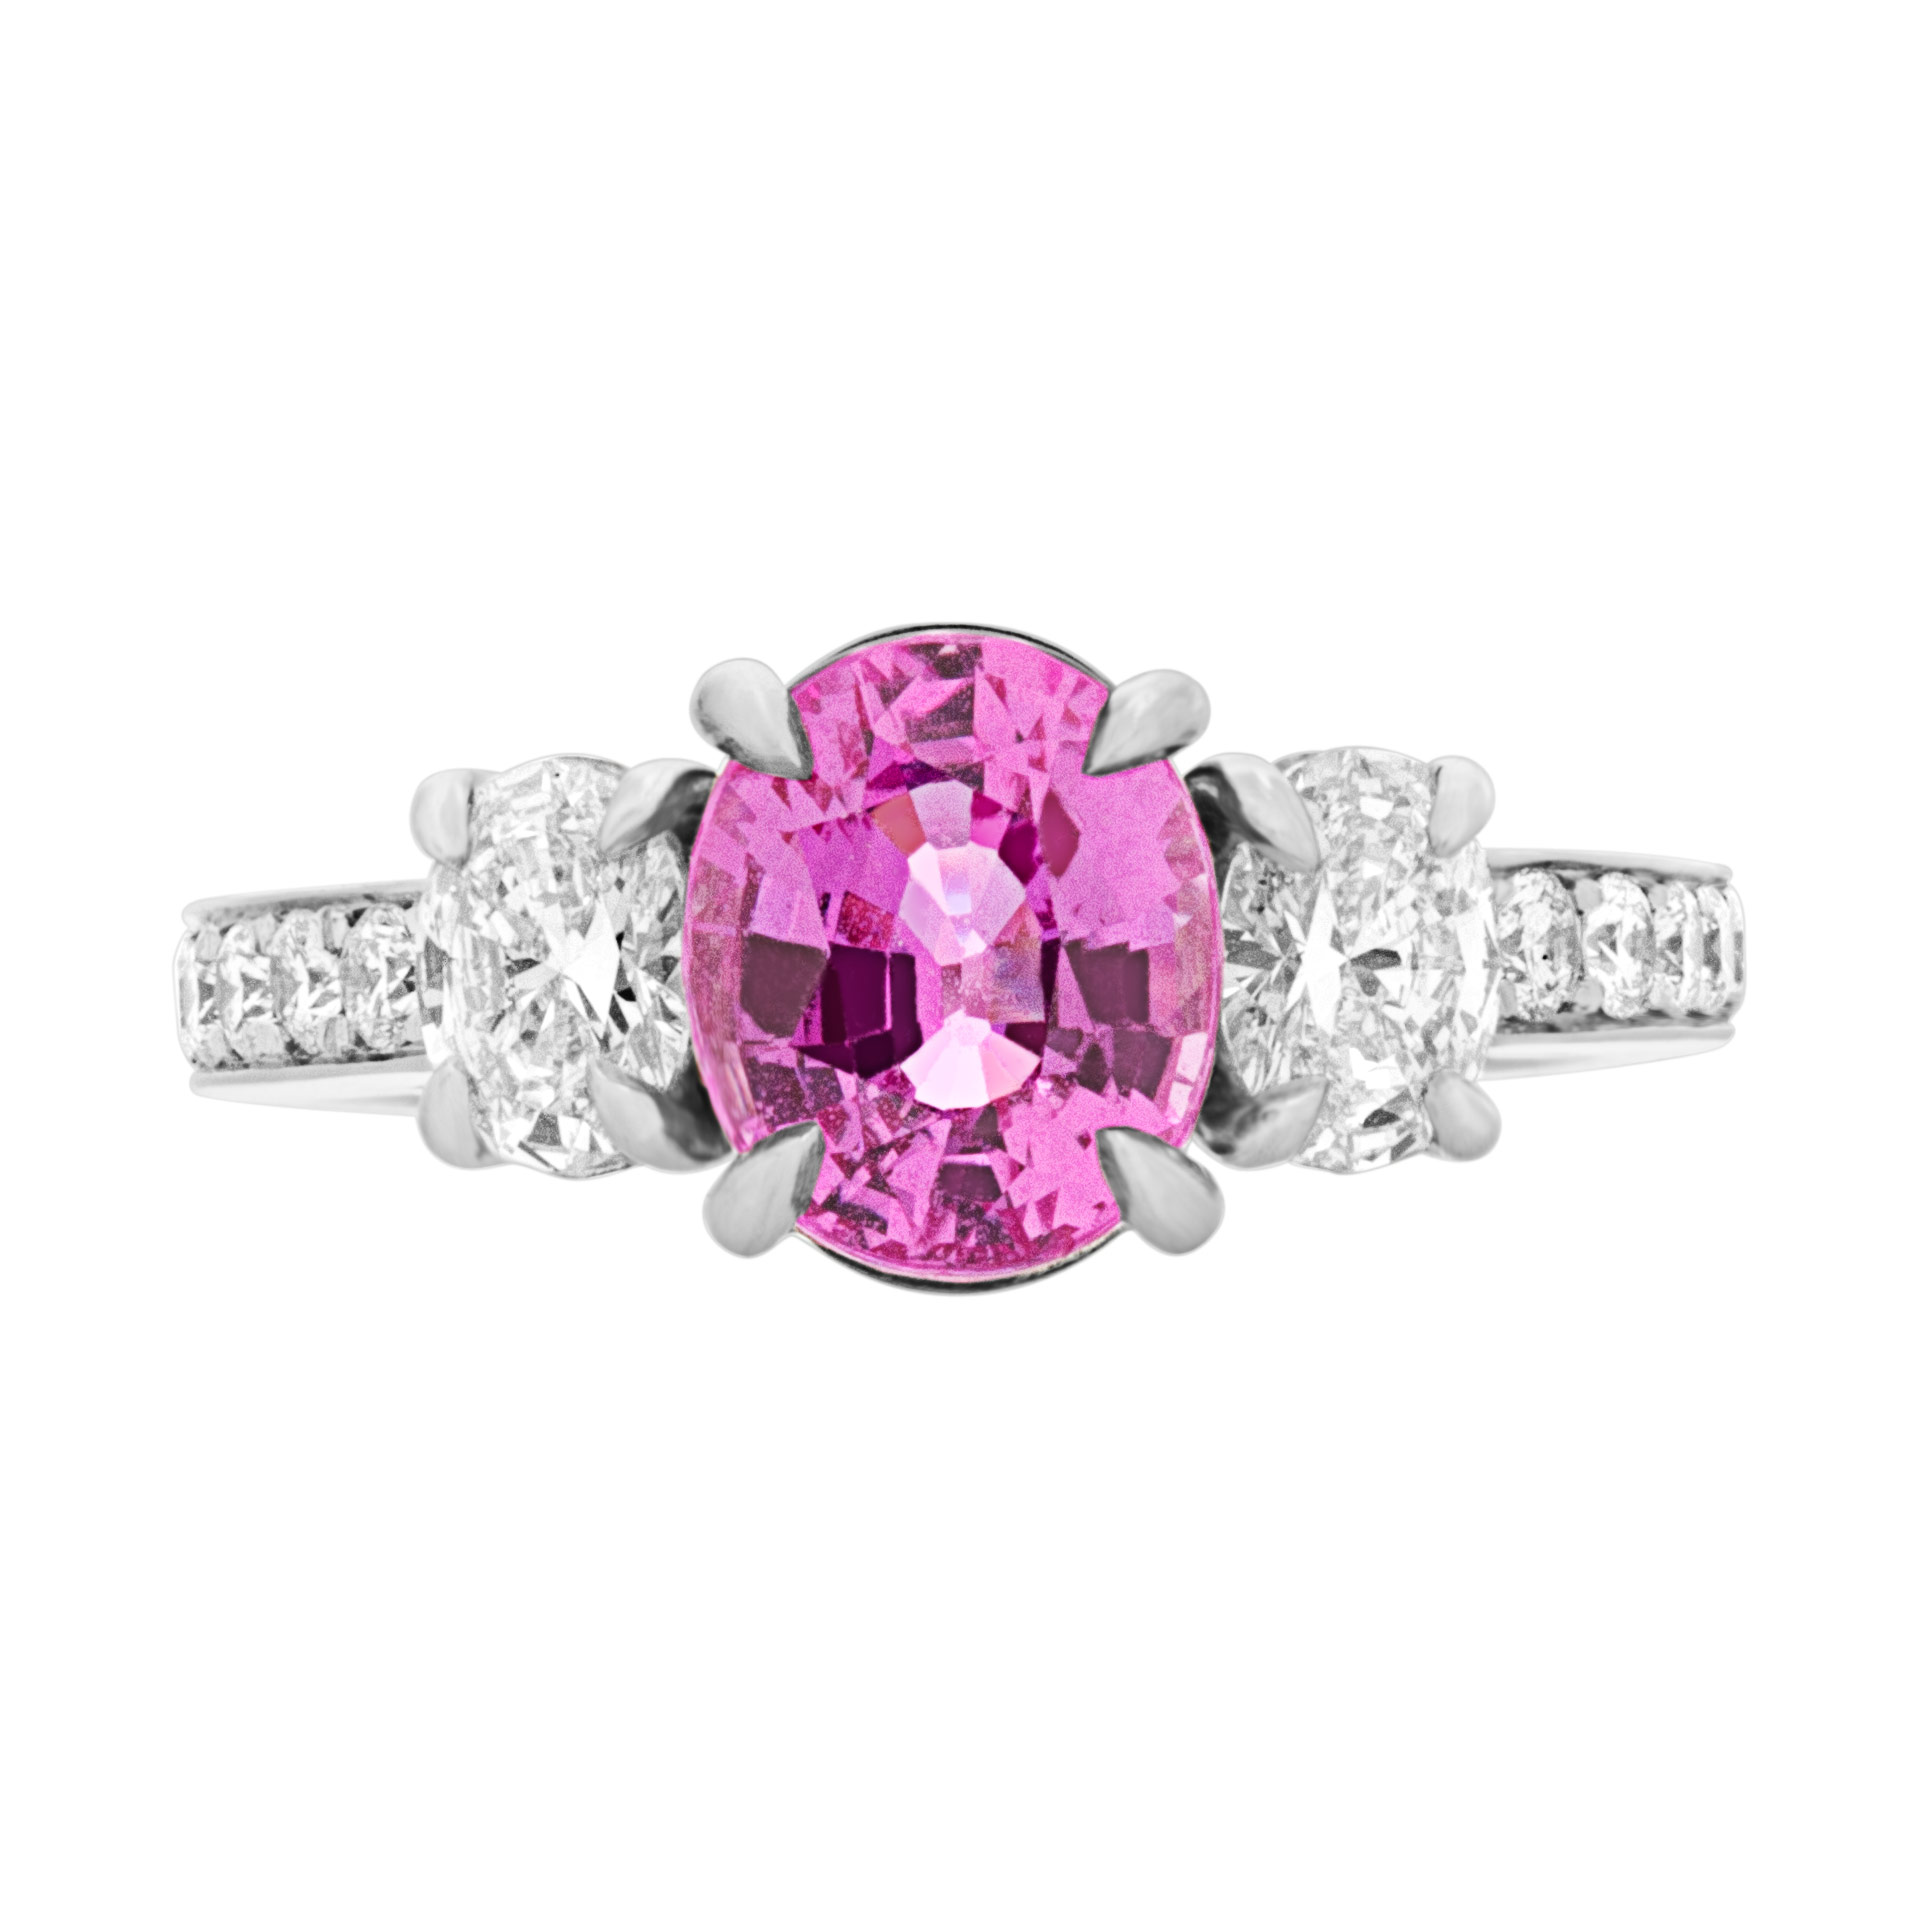 Madagascar Pink sapphire (2.20 cts) set in platinum with diamond accents image 1